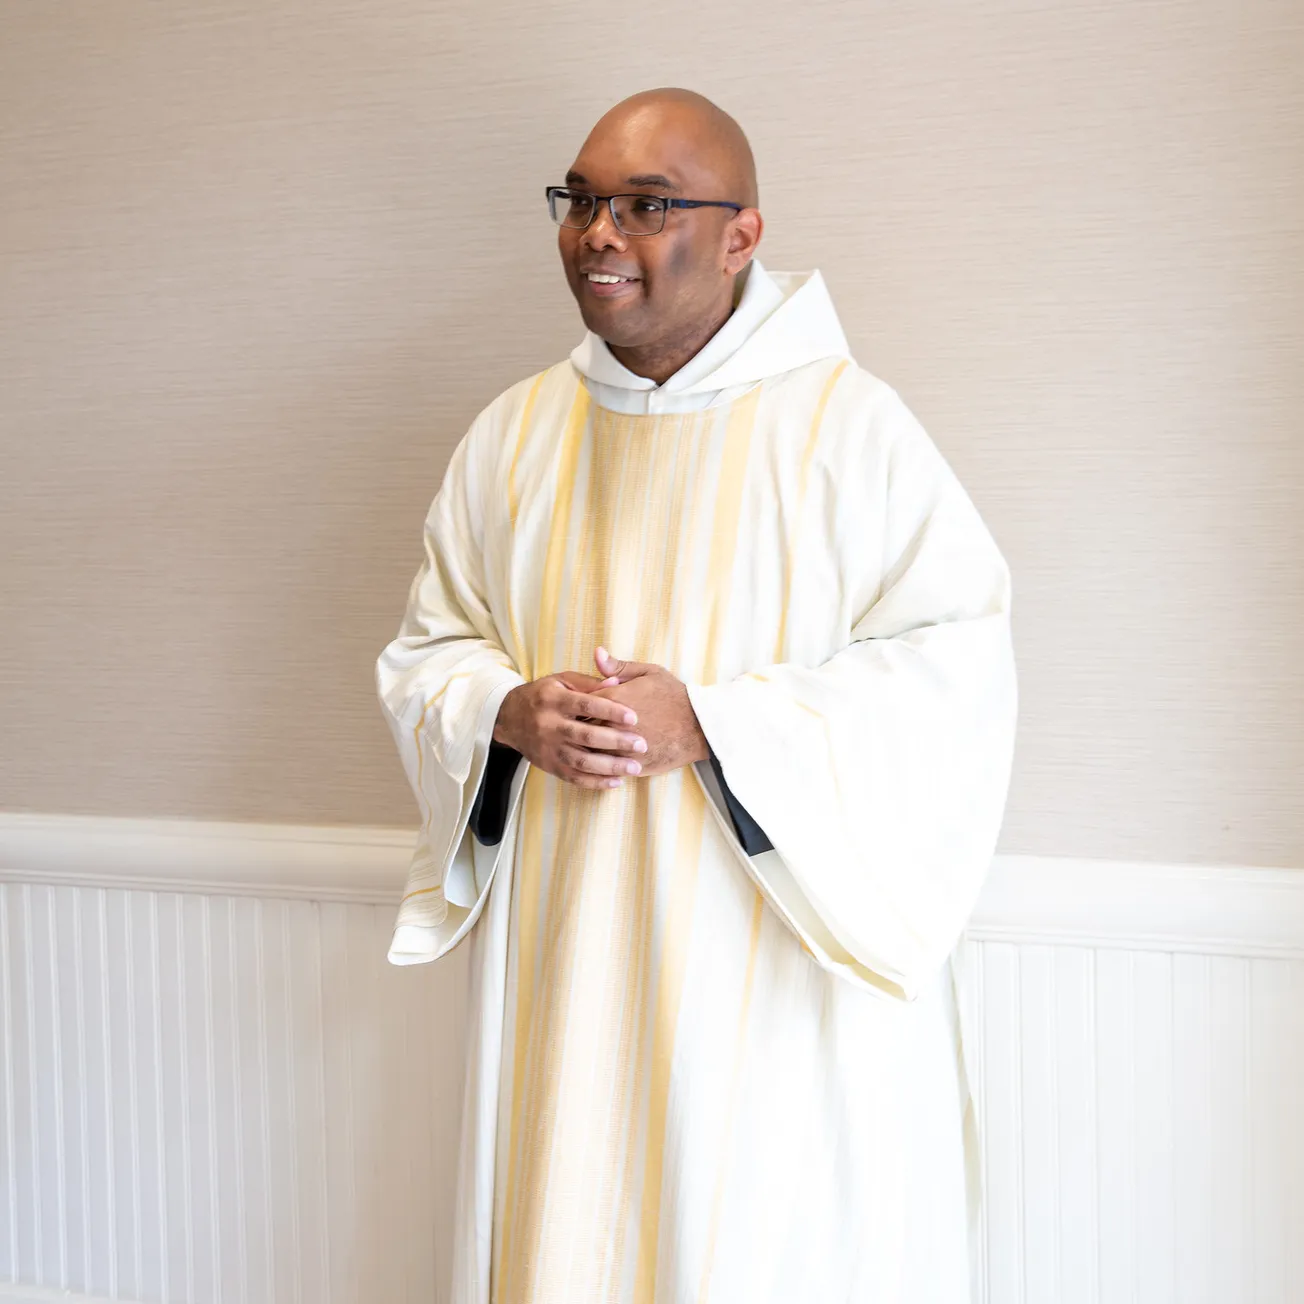 Patrick Winbush, OSB, to be ordained a priest May 20